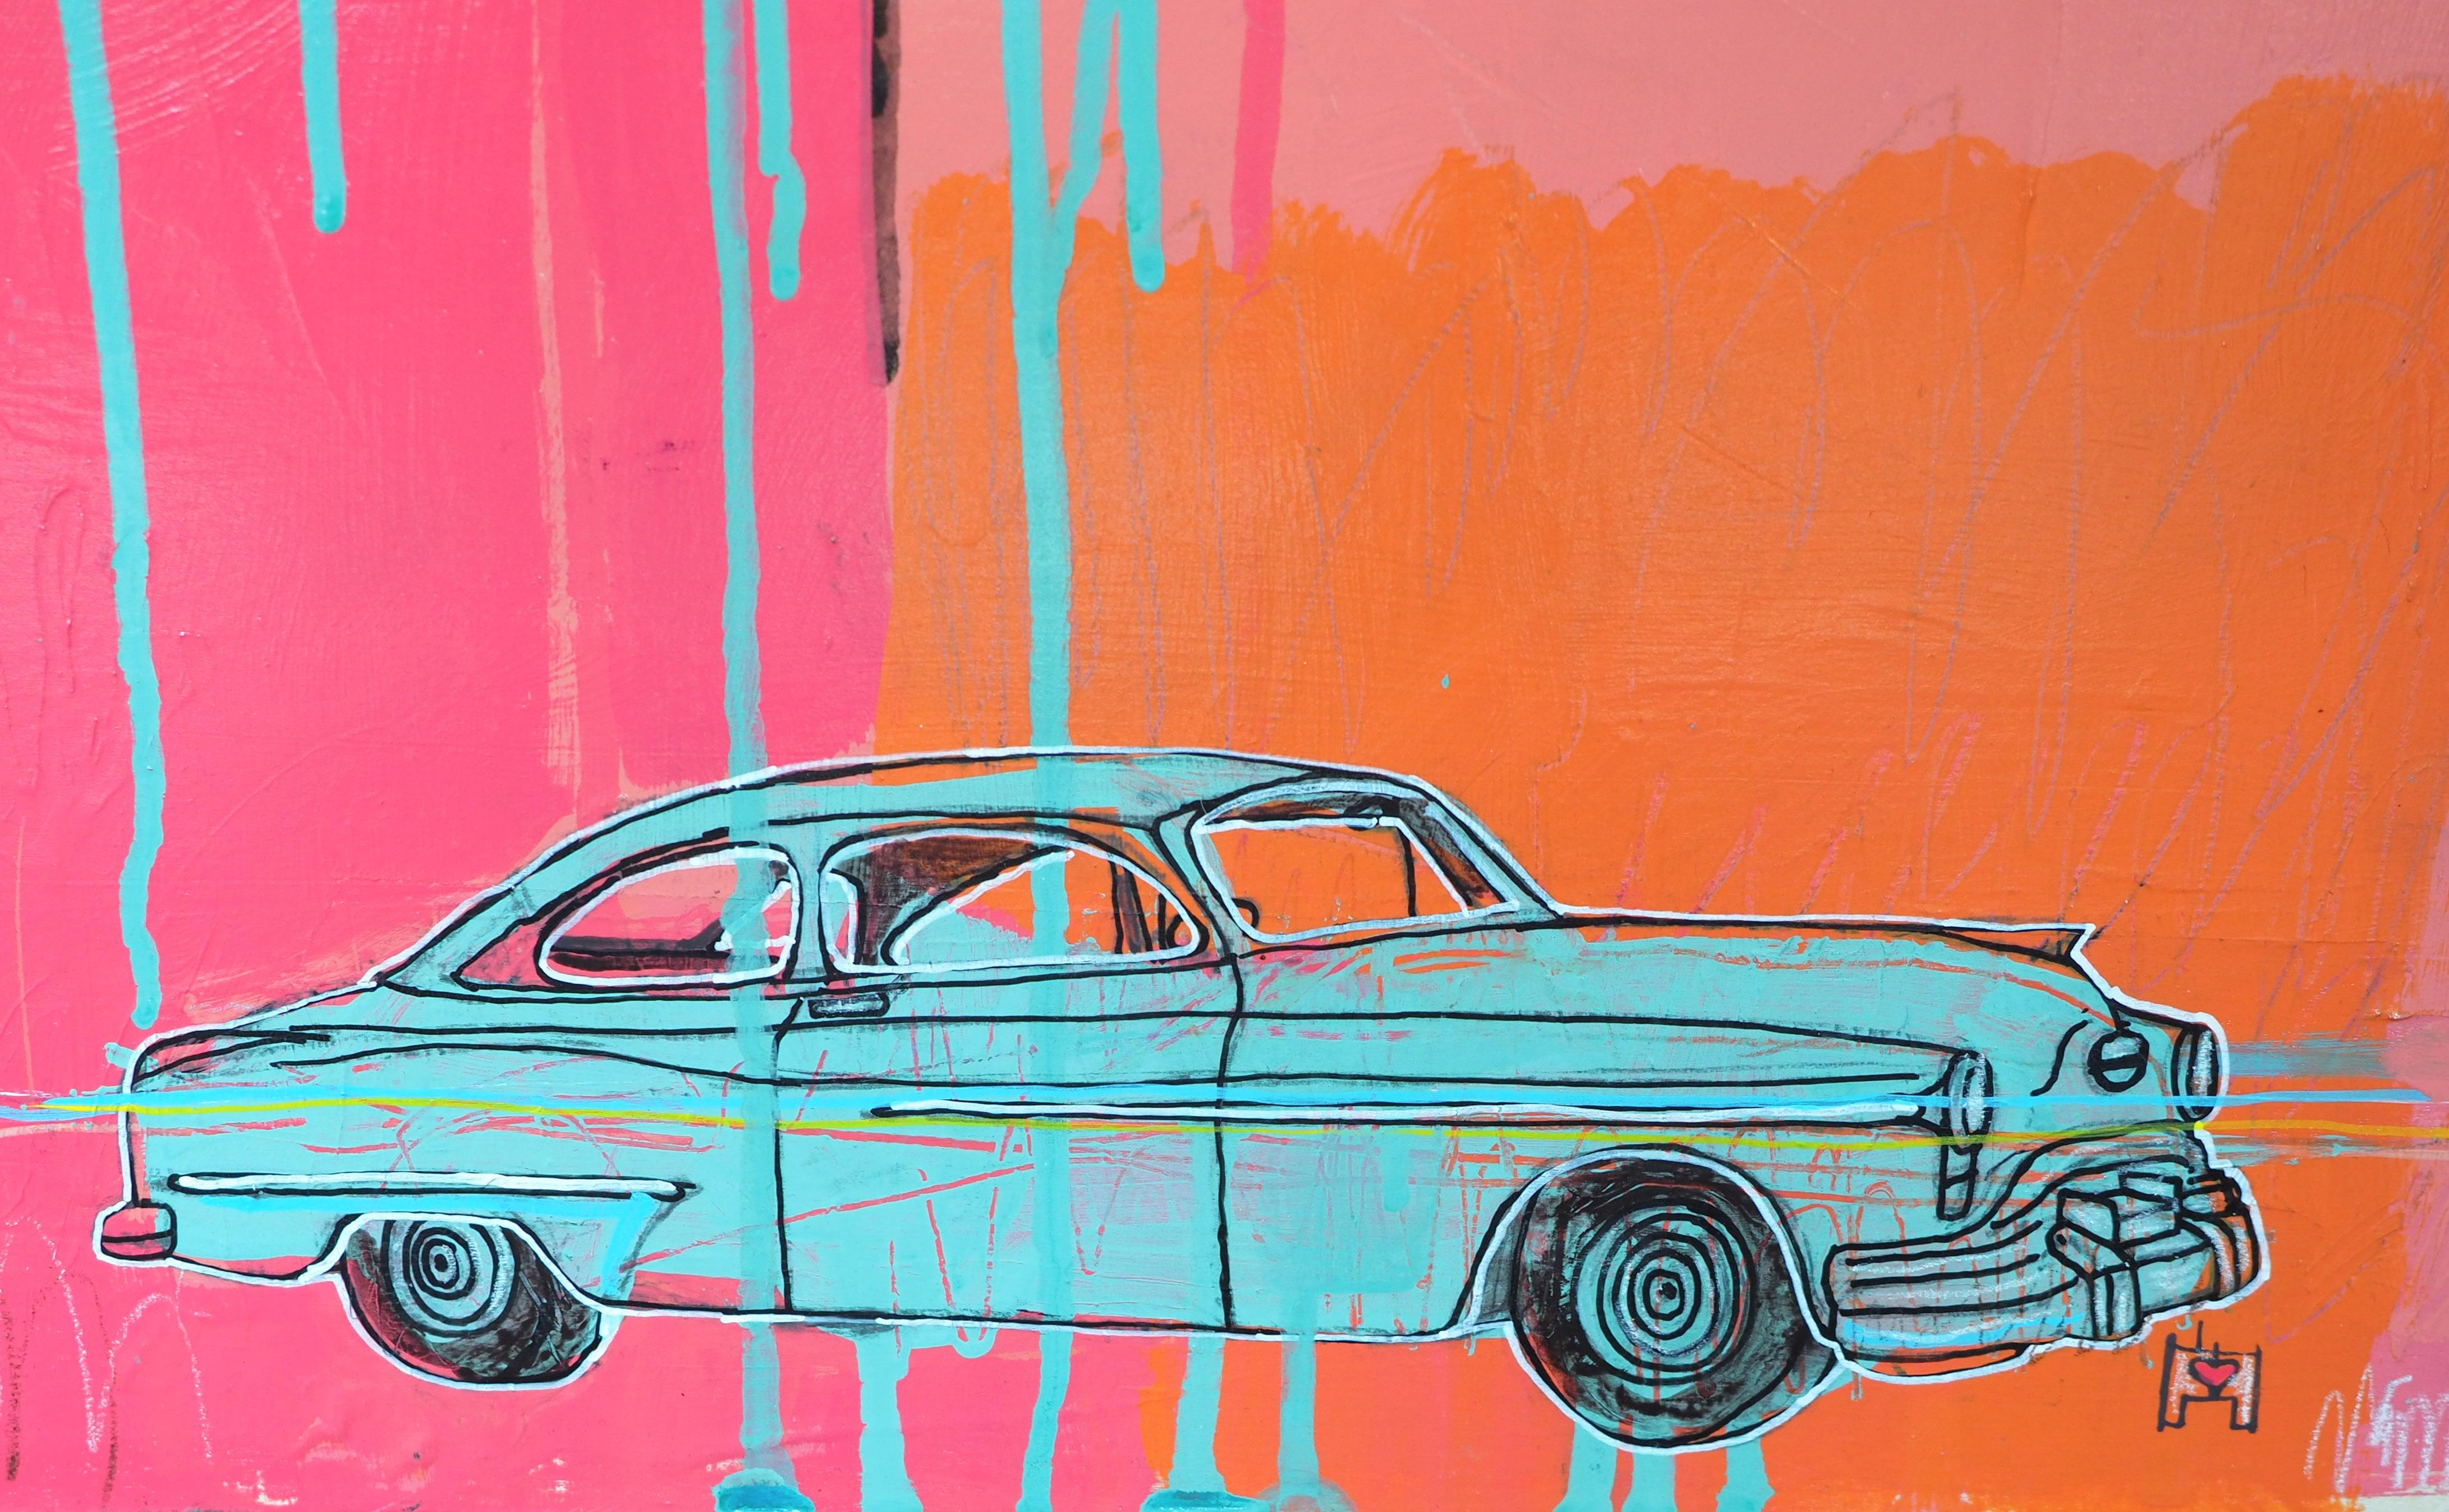 Remain Calm displays a '52 Oldsmobile 303 V8 HP Rocket 88 and canoes repeating throughout the composition. The iconic vehicle, neon and pastel colors of pink and teal, embody the memory of McAdoo's late uncle, while the canoe has become a fixture in